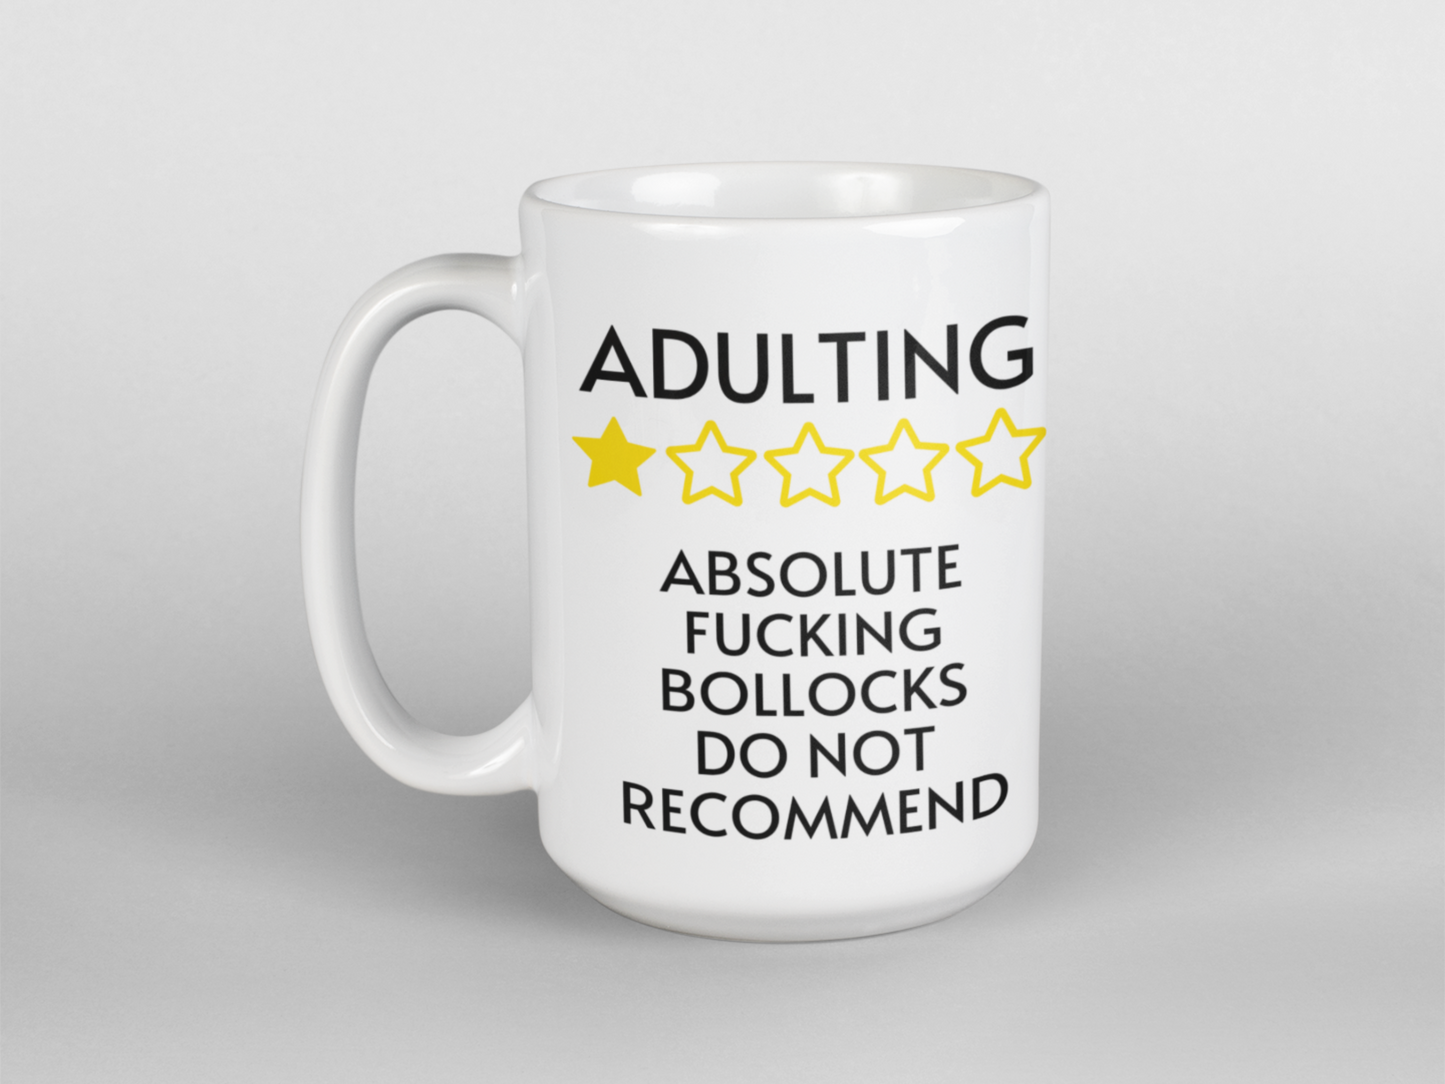 Adulting Absolute F-ing Bollocks Do Not Recommend - Funny Rude Coffee Mug for Birthday, Christmas, Humorous Gifts